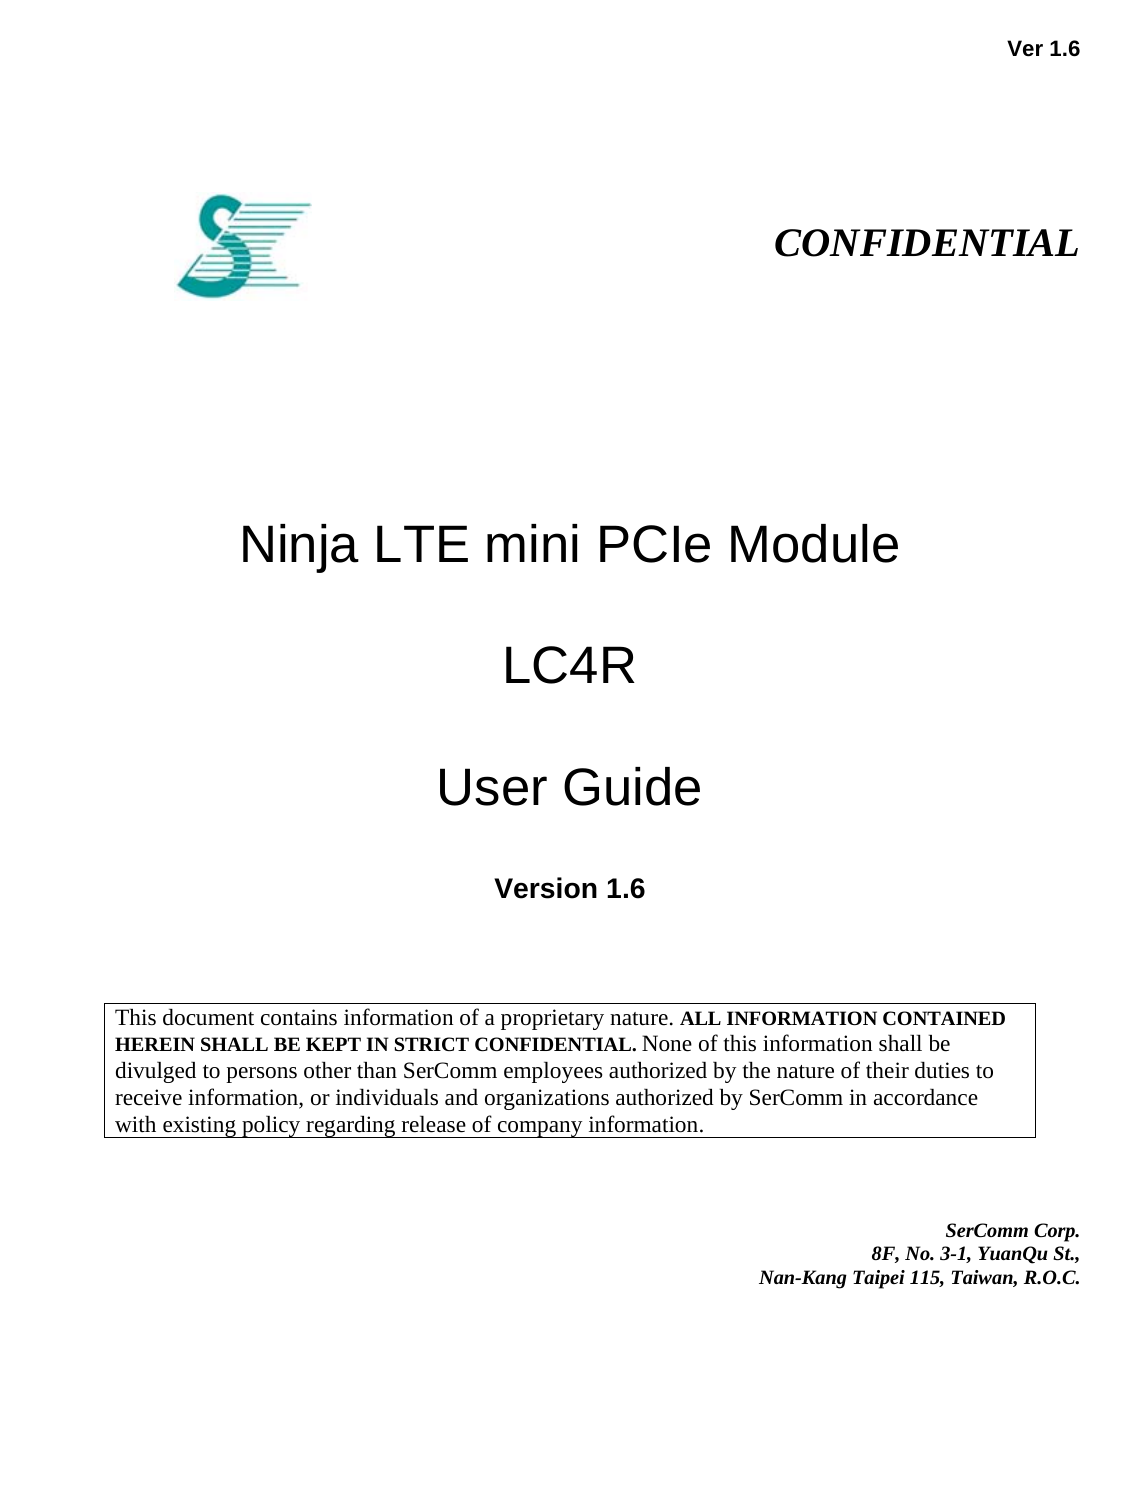   Ver 1.6                                                                                                                     CONFIDENTIAL            Ninja LTE mini PCIe Module   LC4R   User Guide  Version 1.6                                                                                                                                                                                                    This document contains information of a proprietary nature. ALL INFORMATION CONTAINED HEREIN SHALL BE KEPT IN STRICT CONFIDENTIAL. None of this information shall be divulged to persons other than SerComm employees authorized by the nature of their duties to receive information, or individuals and organizations authorized by SerComm in accordance with existing policy regarding release of company information.       SerComm Corp.  8F, No. 3-1, YuanQu St.,  Nan-Kang Taipei 115, Taiwan, R.O.C. 